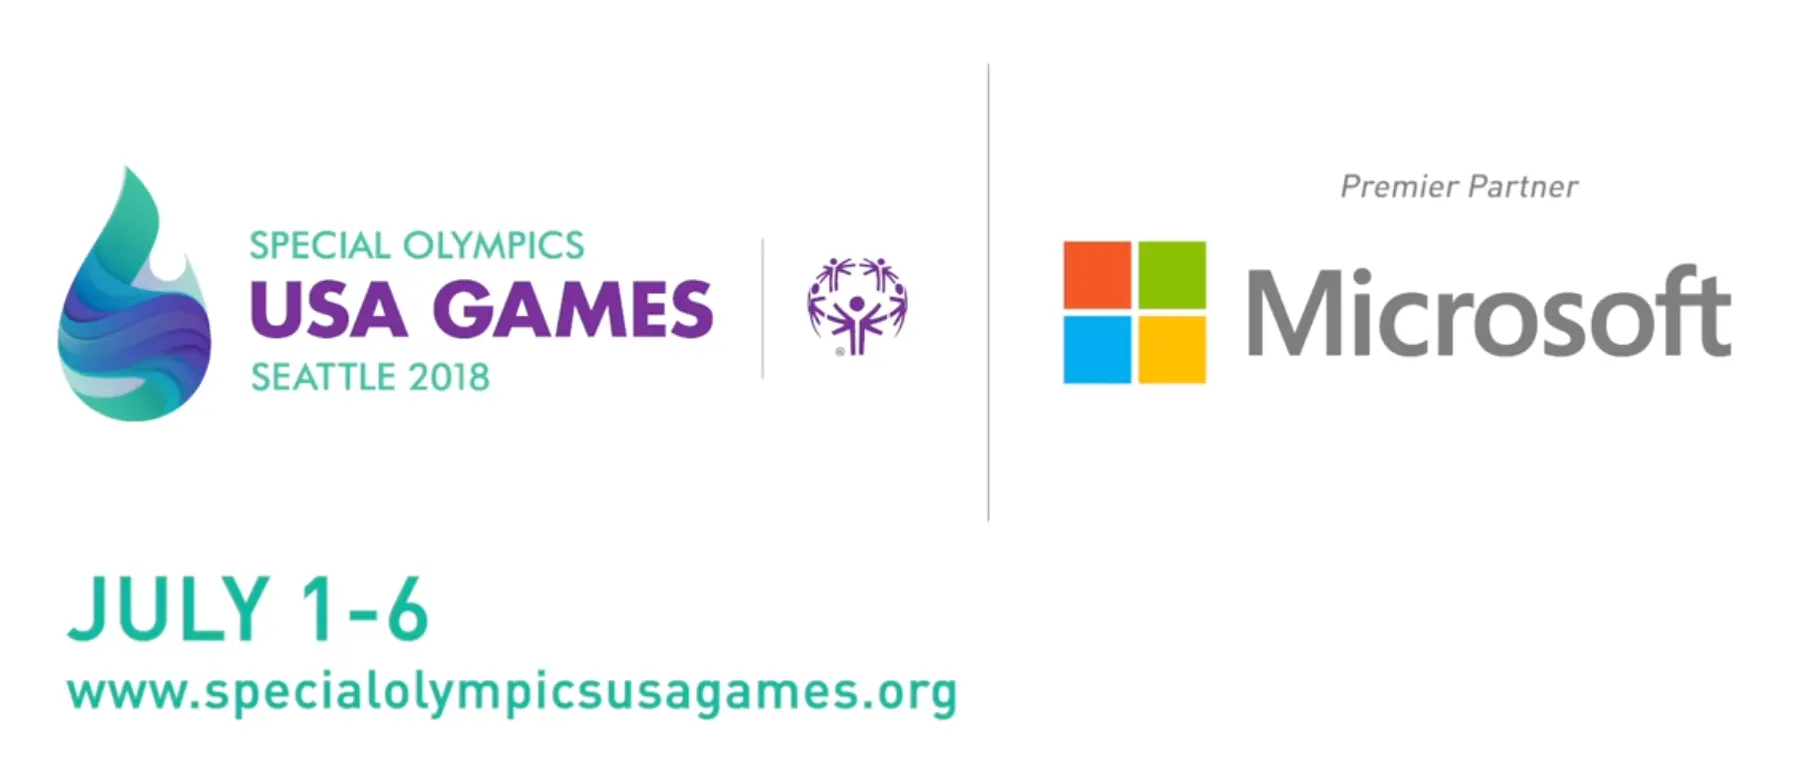 MICROSOFT FOR NON PROFITS SPECIAL OLYMPICS